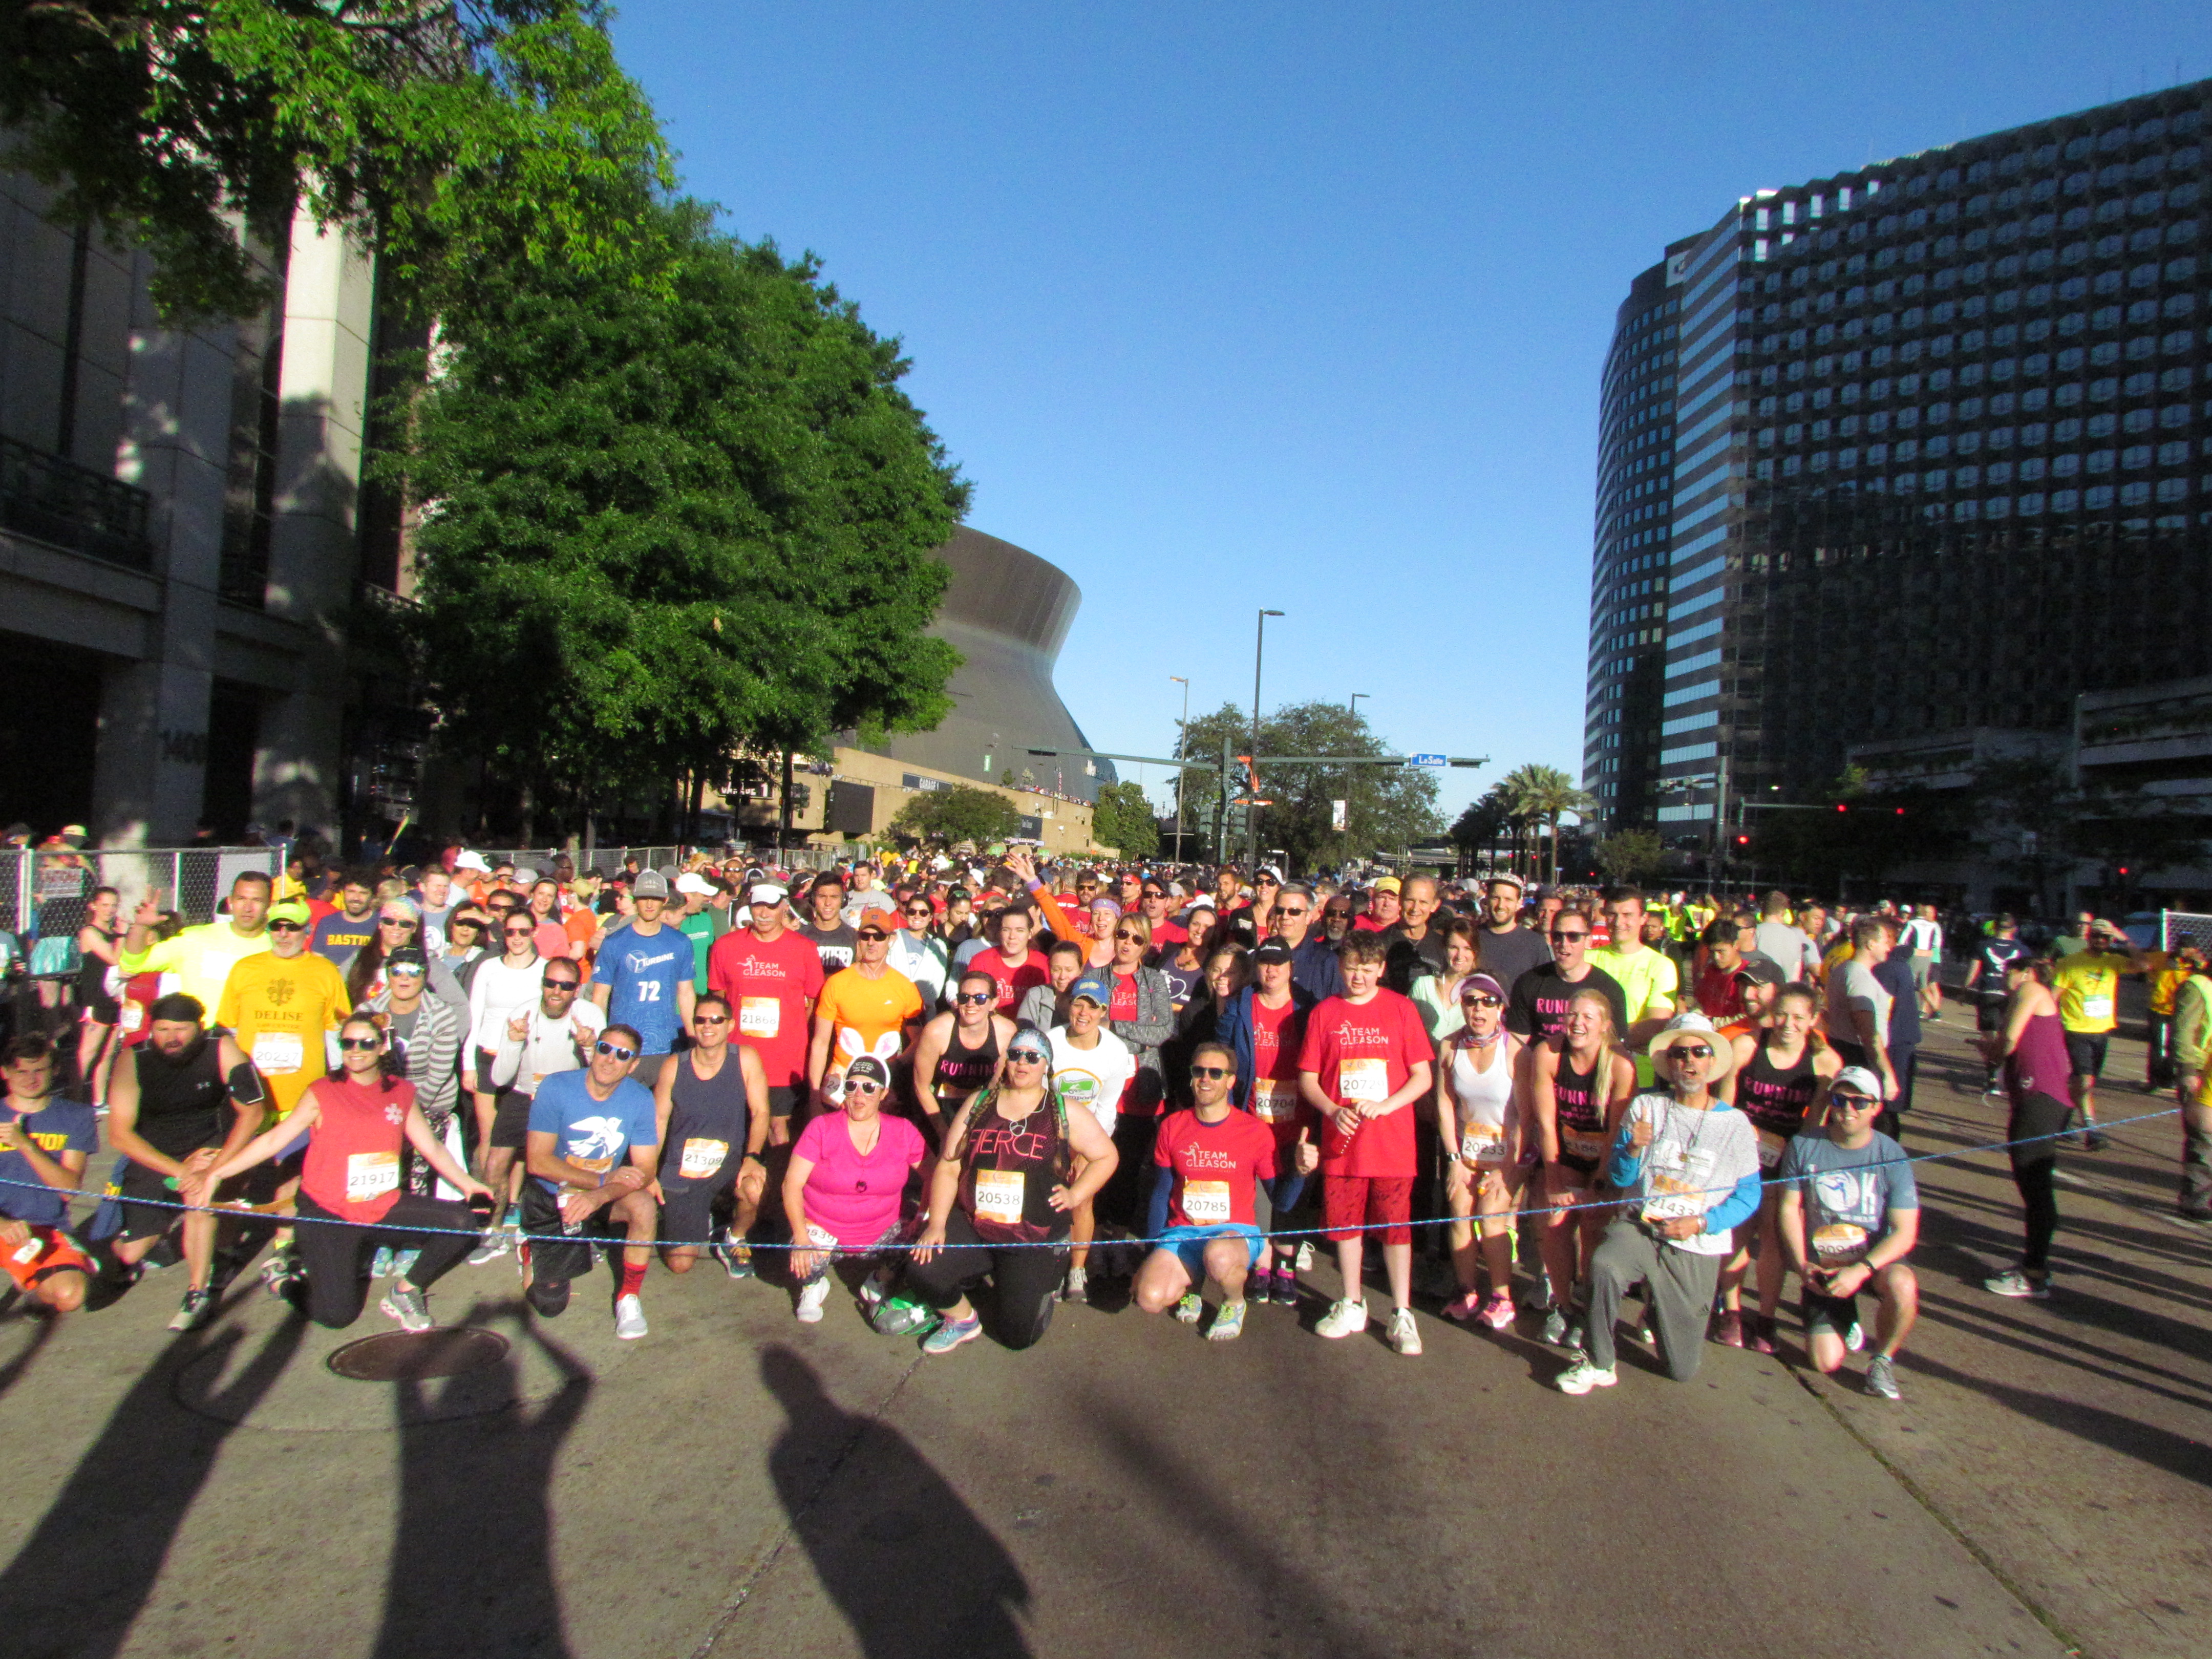 The crowd prepared to run at the Crescent City Classic.